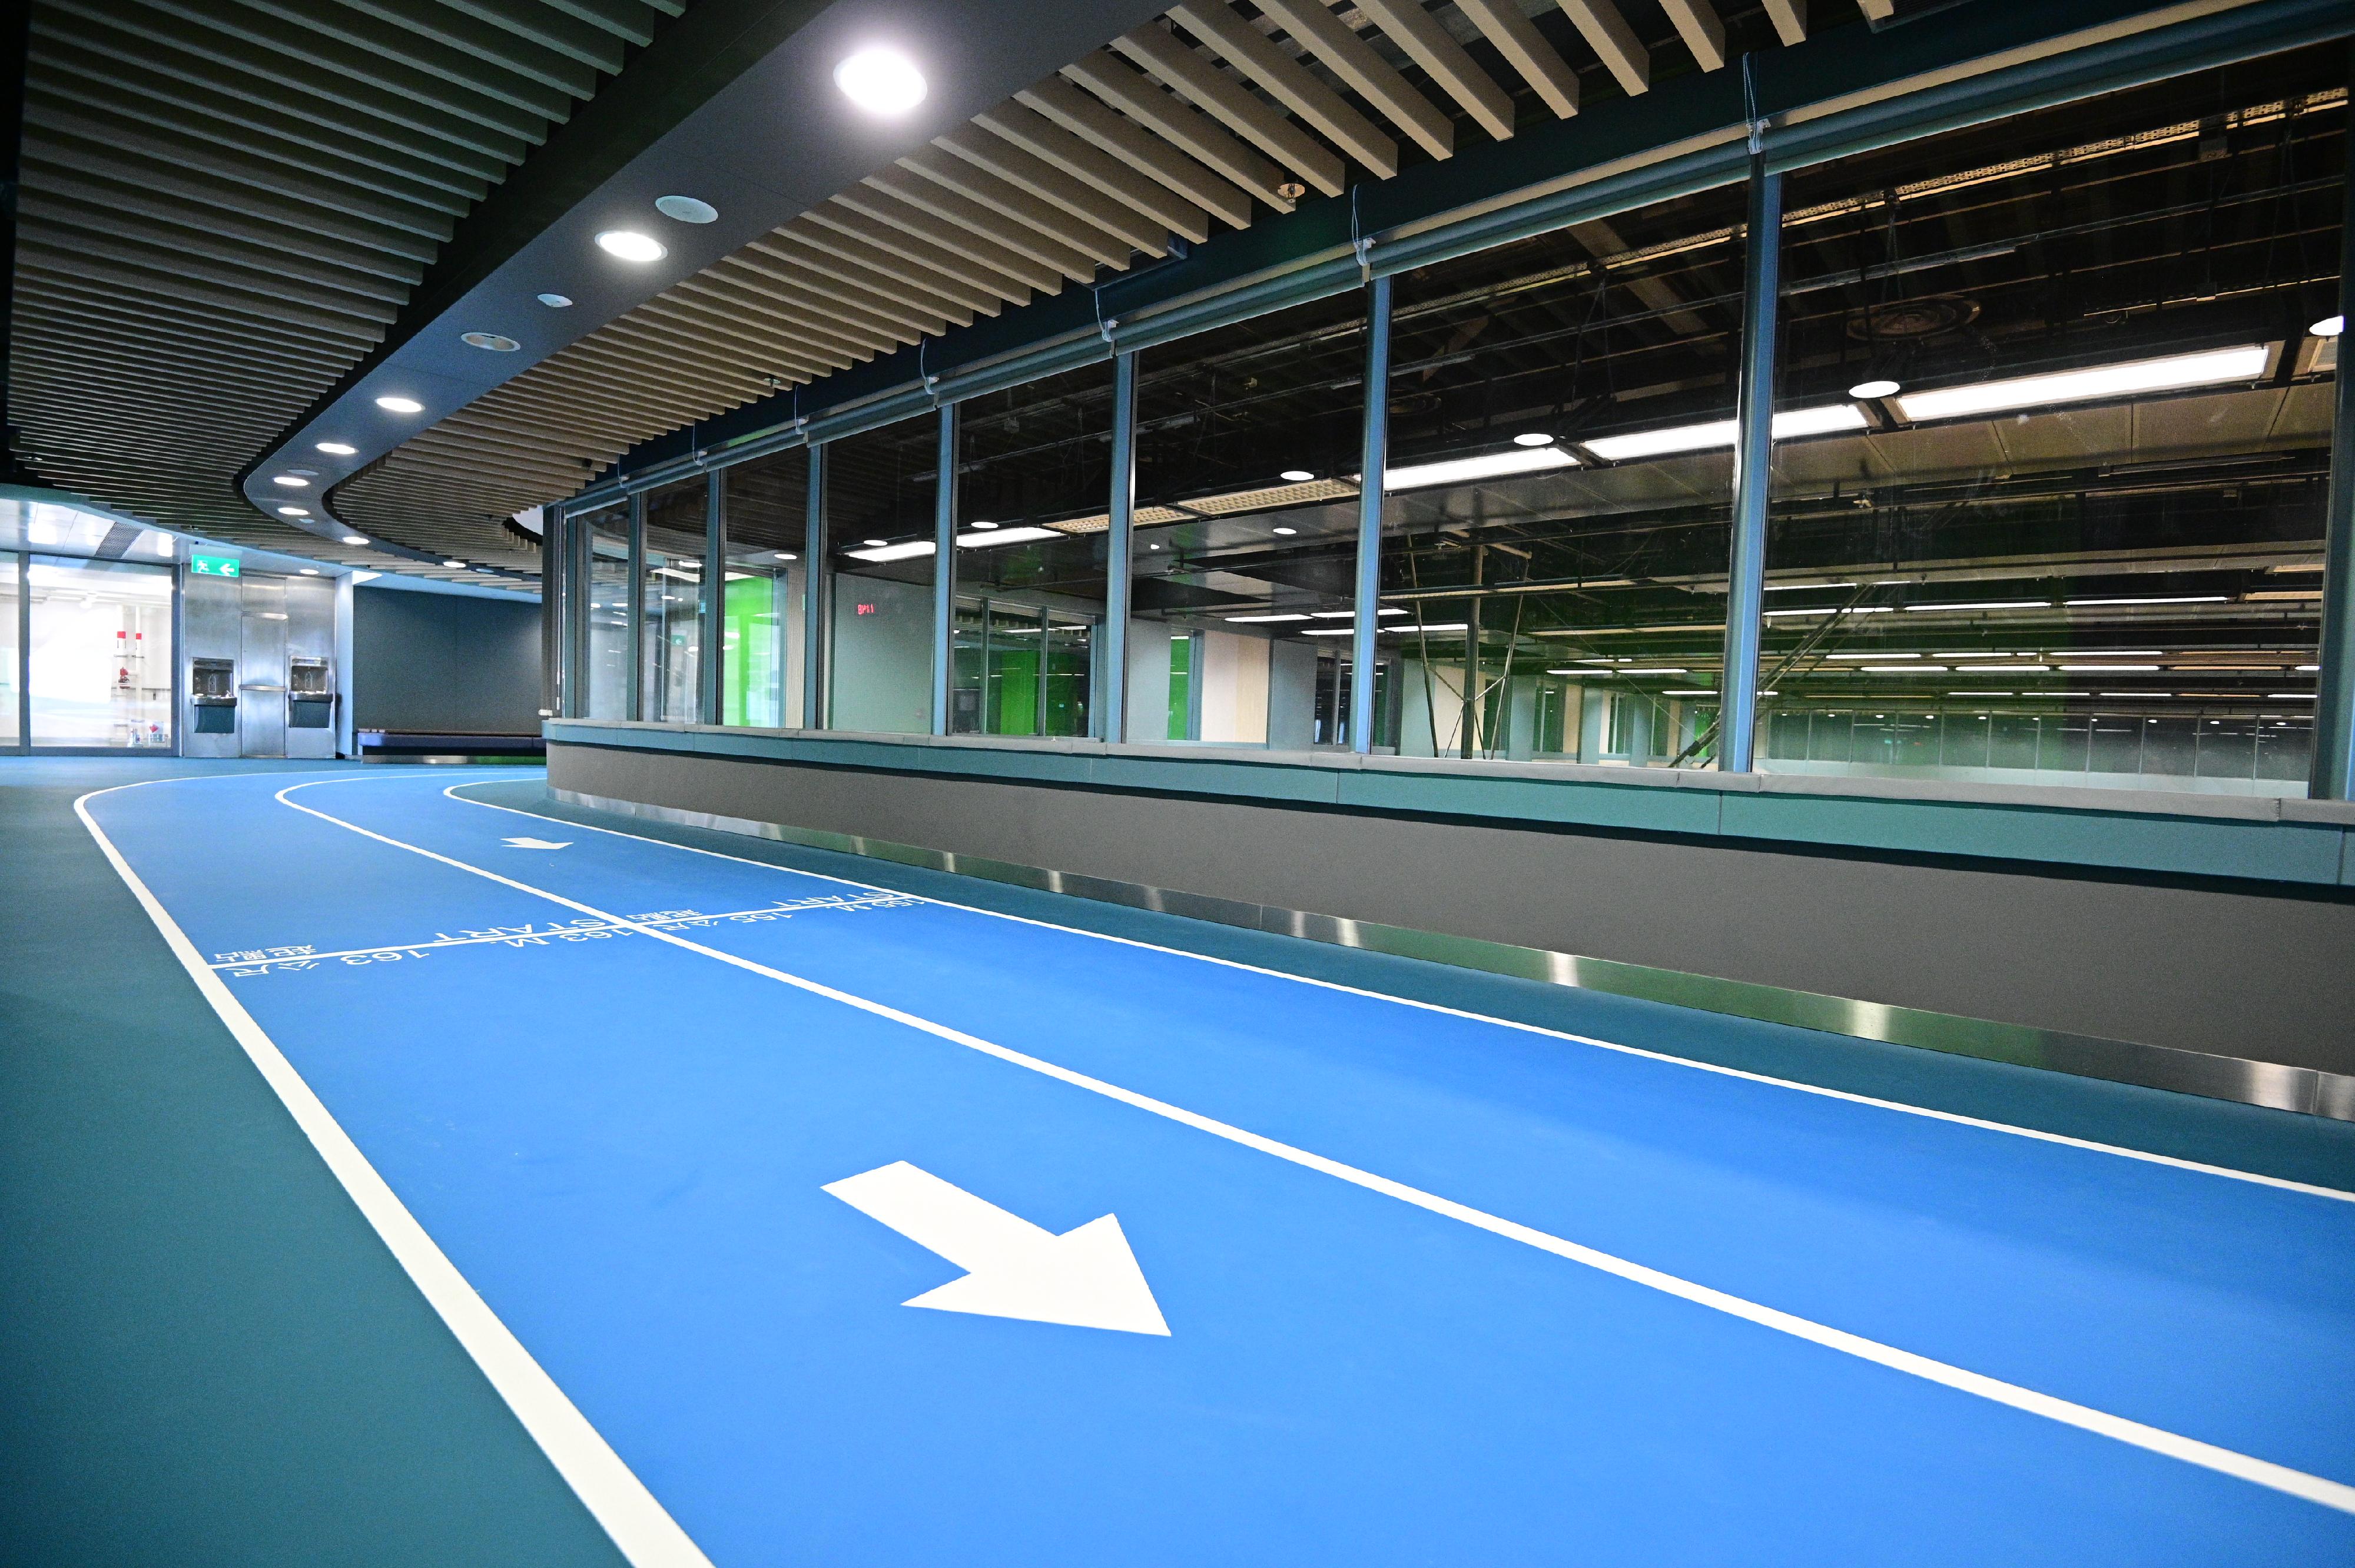 Choi Wing Road Sports Centre, managed by the Leisure and Cultural Services Department, will open for public use on December 29 (Wednesday), providing a wide range of leisure and sports facilities for the residents. Photo shows the indoor jogging track.